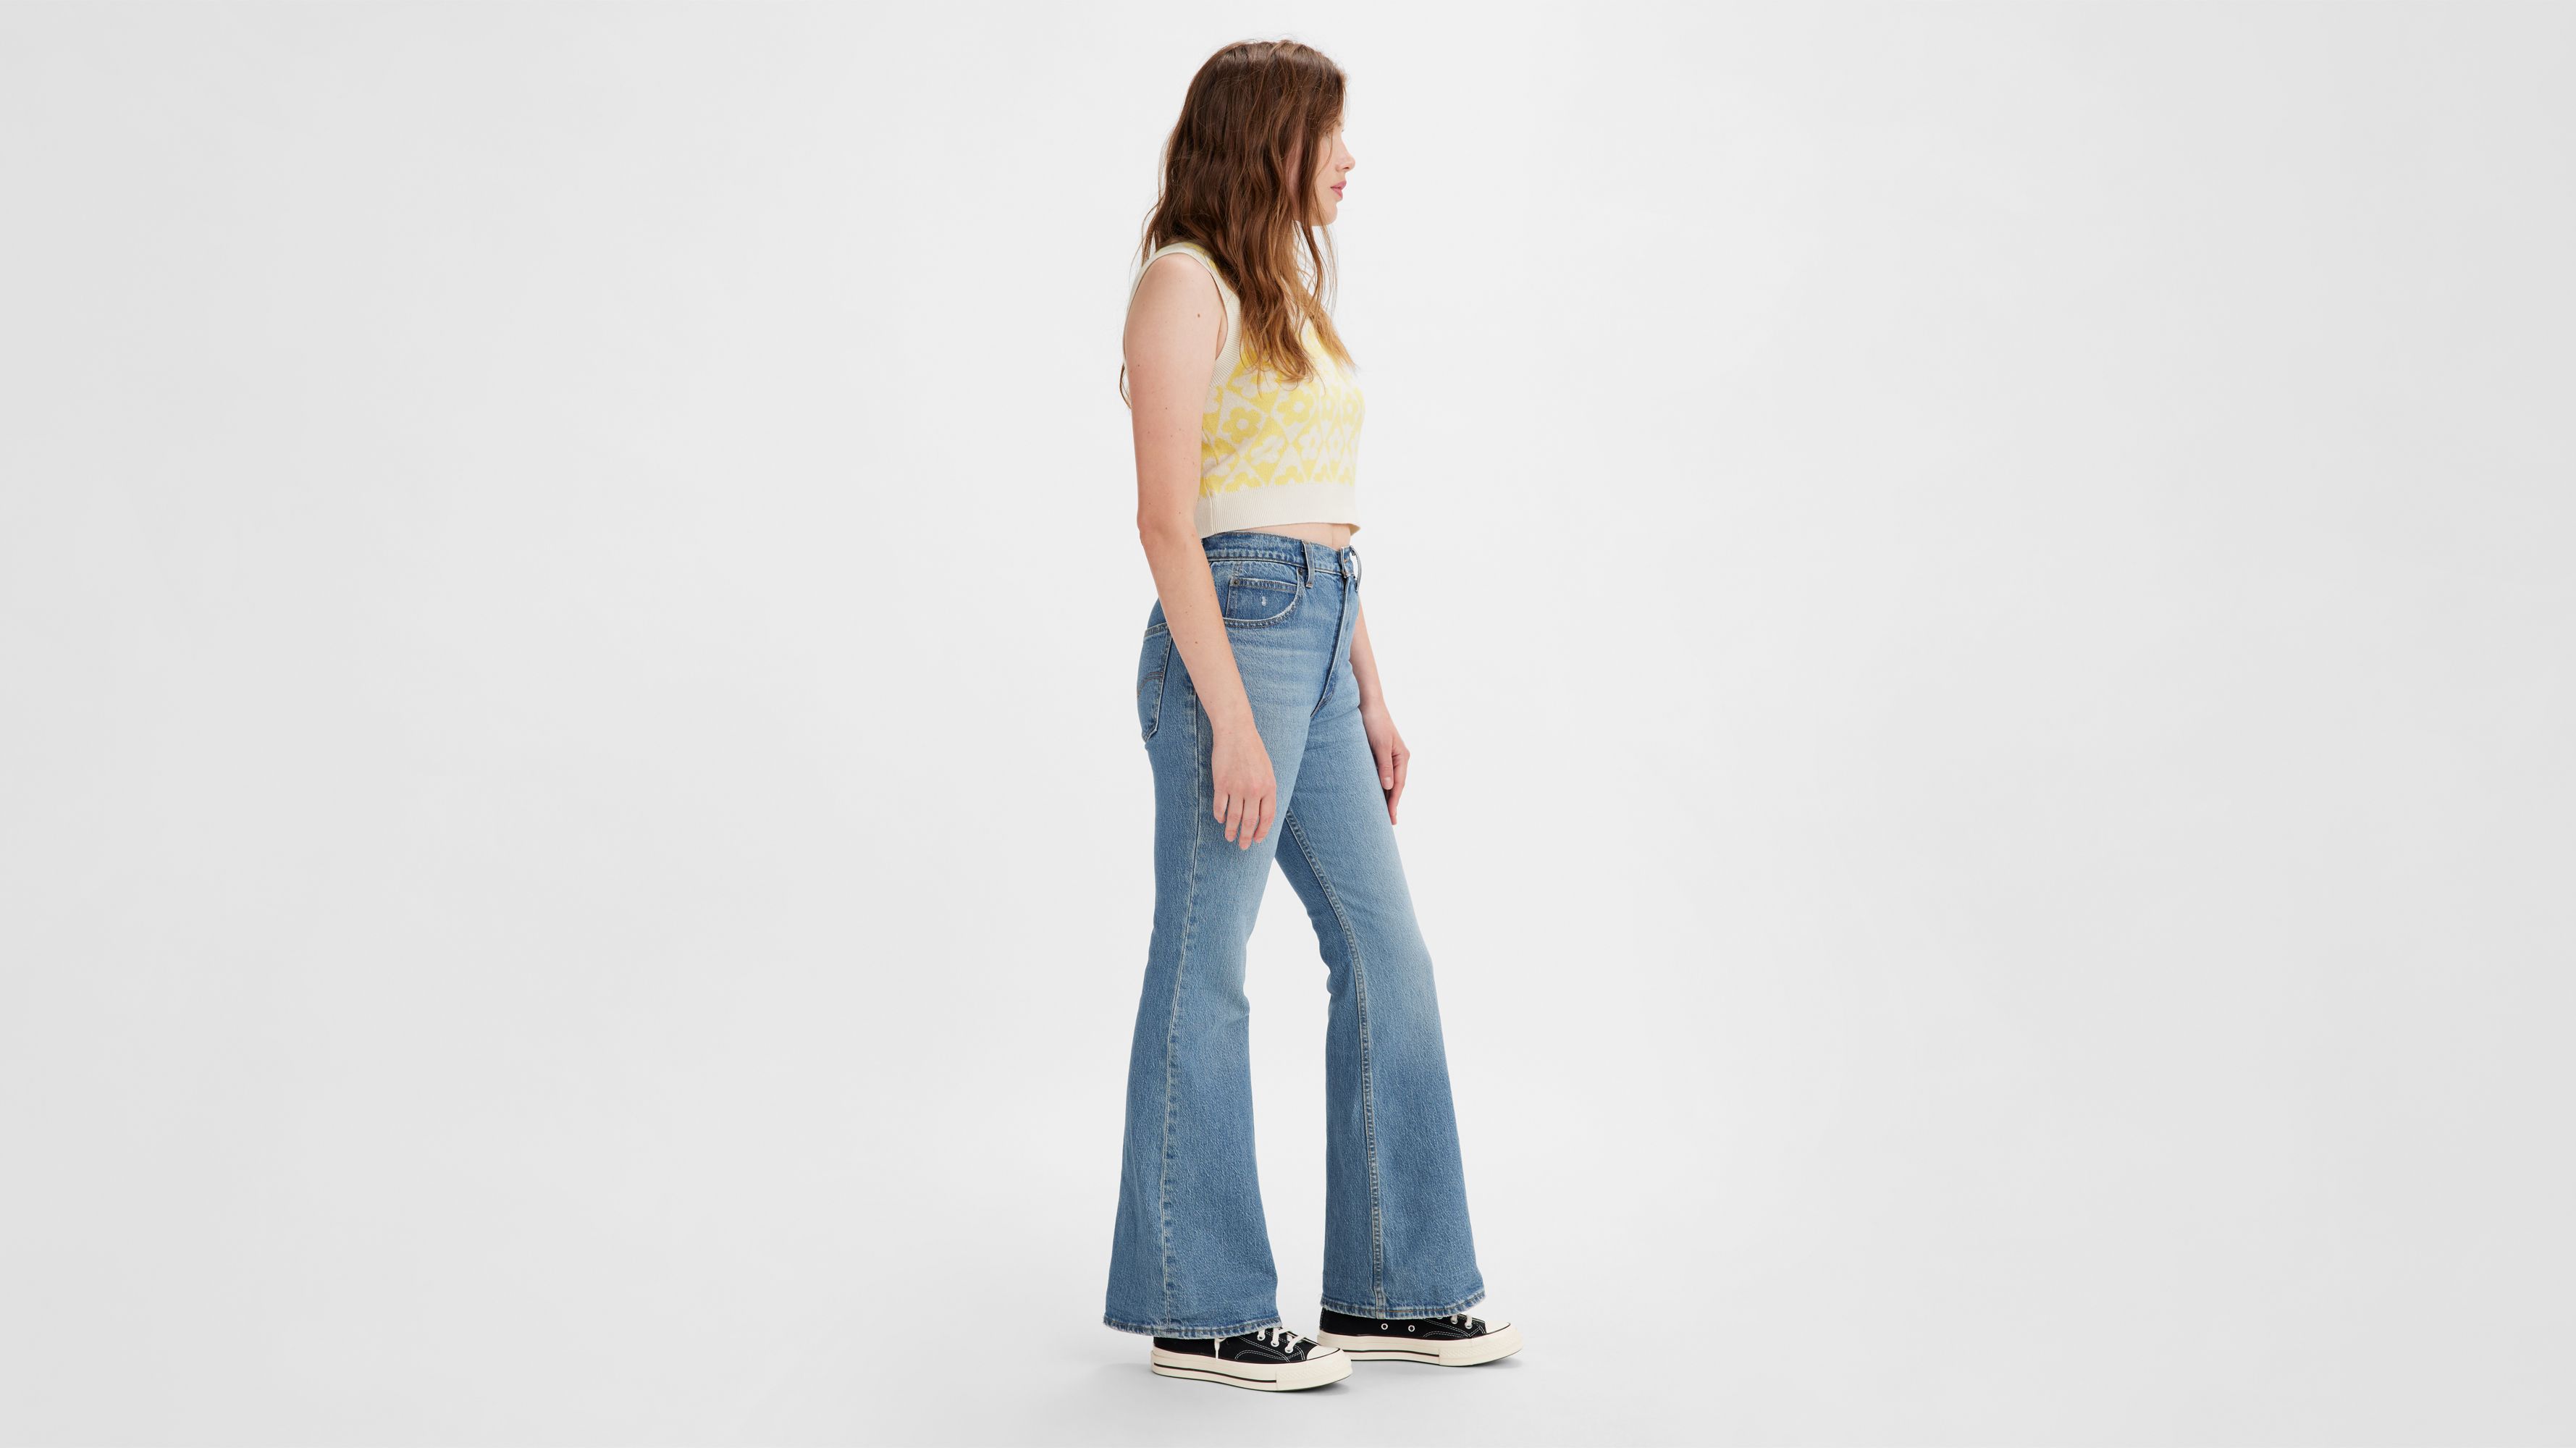 Levi's Women's 70s High Flare Jeans: Buy Online at Best Price in UAE 